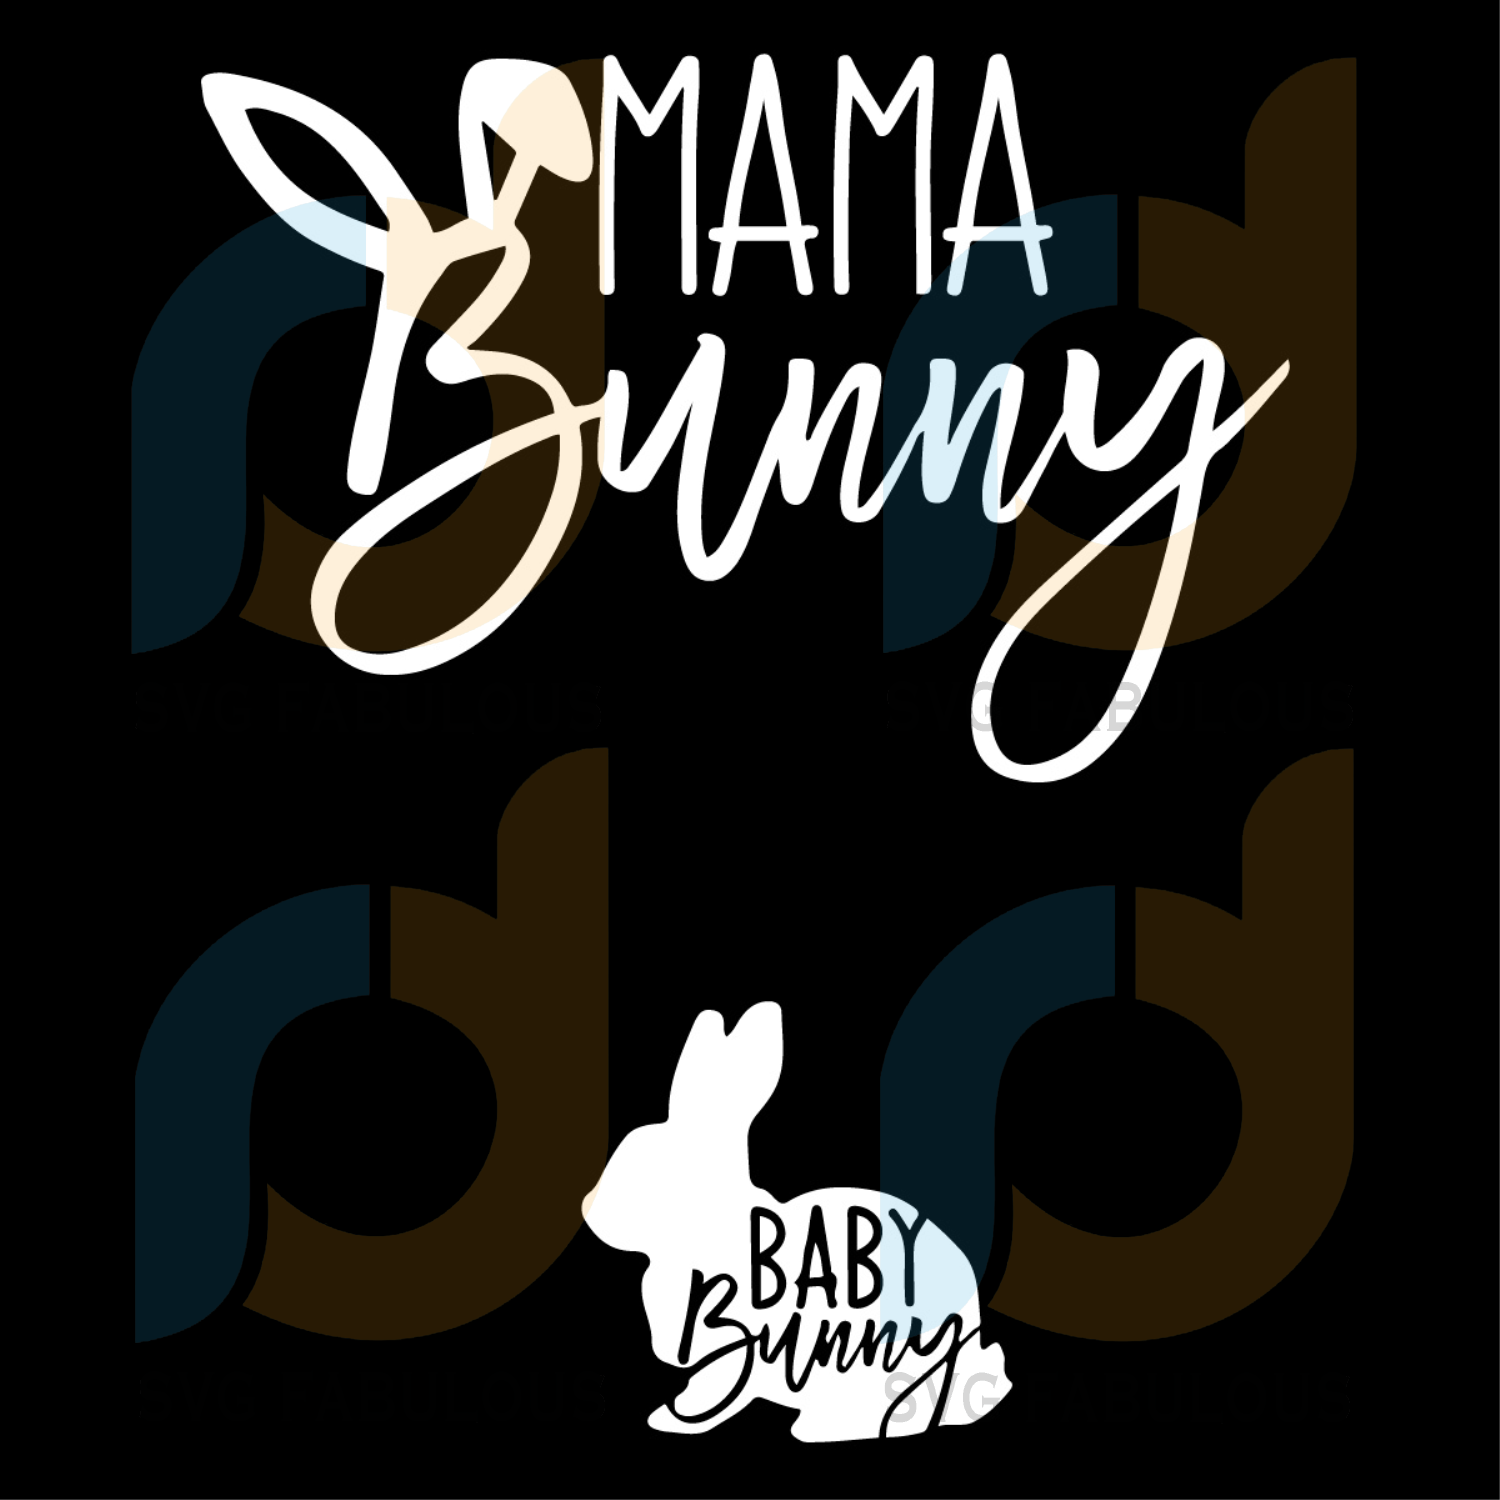 Download Mama Bunny Svg Mothers Day Svg Bunny Svg Bunny Mama Svg Bunny Mom Svg Fabulous